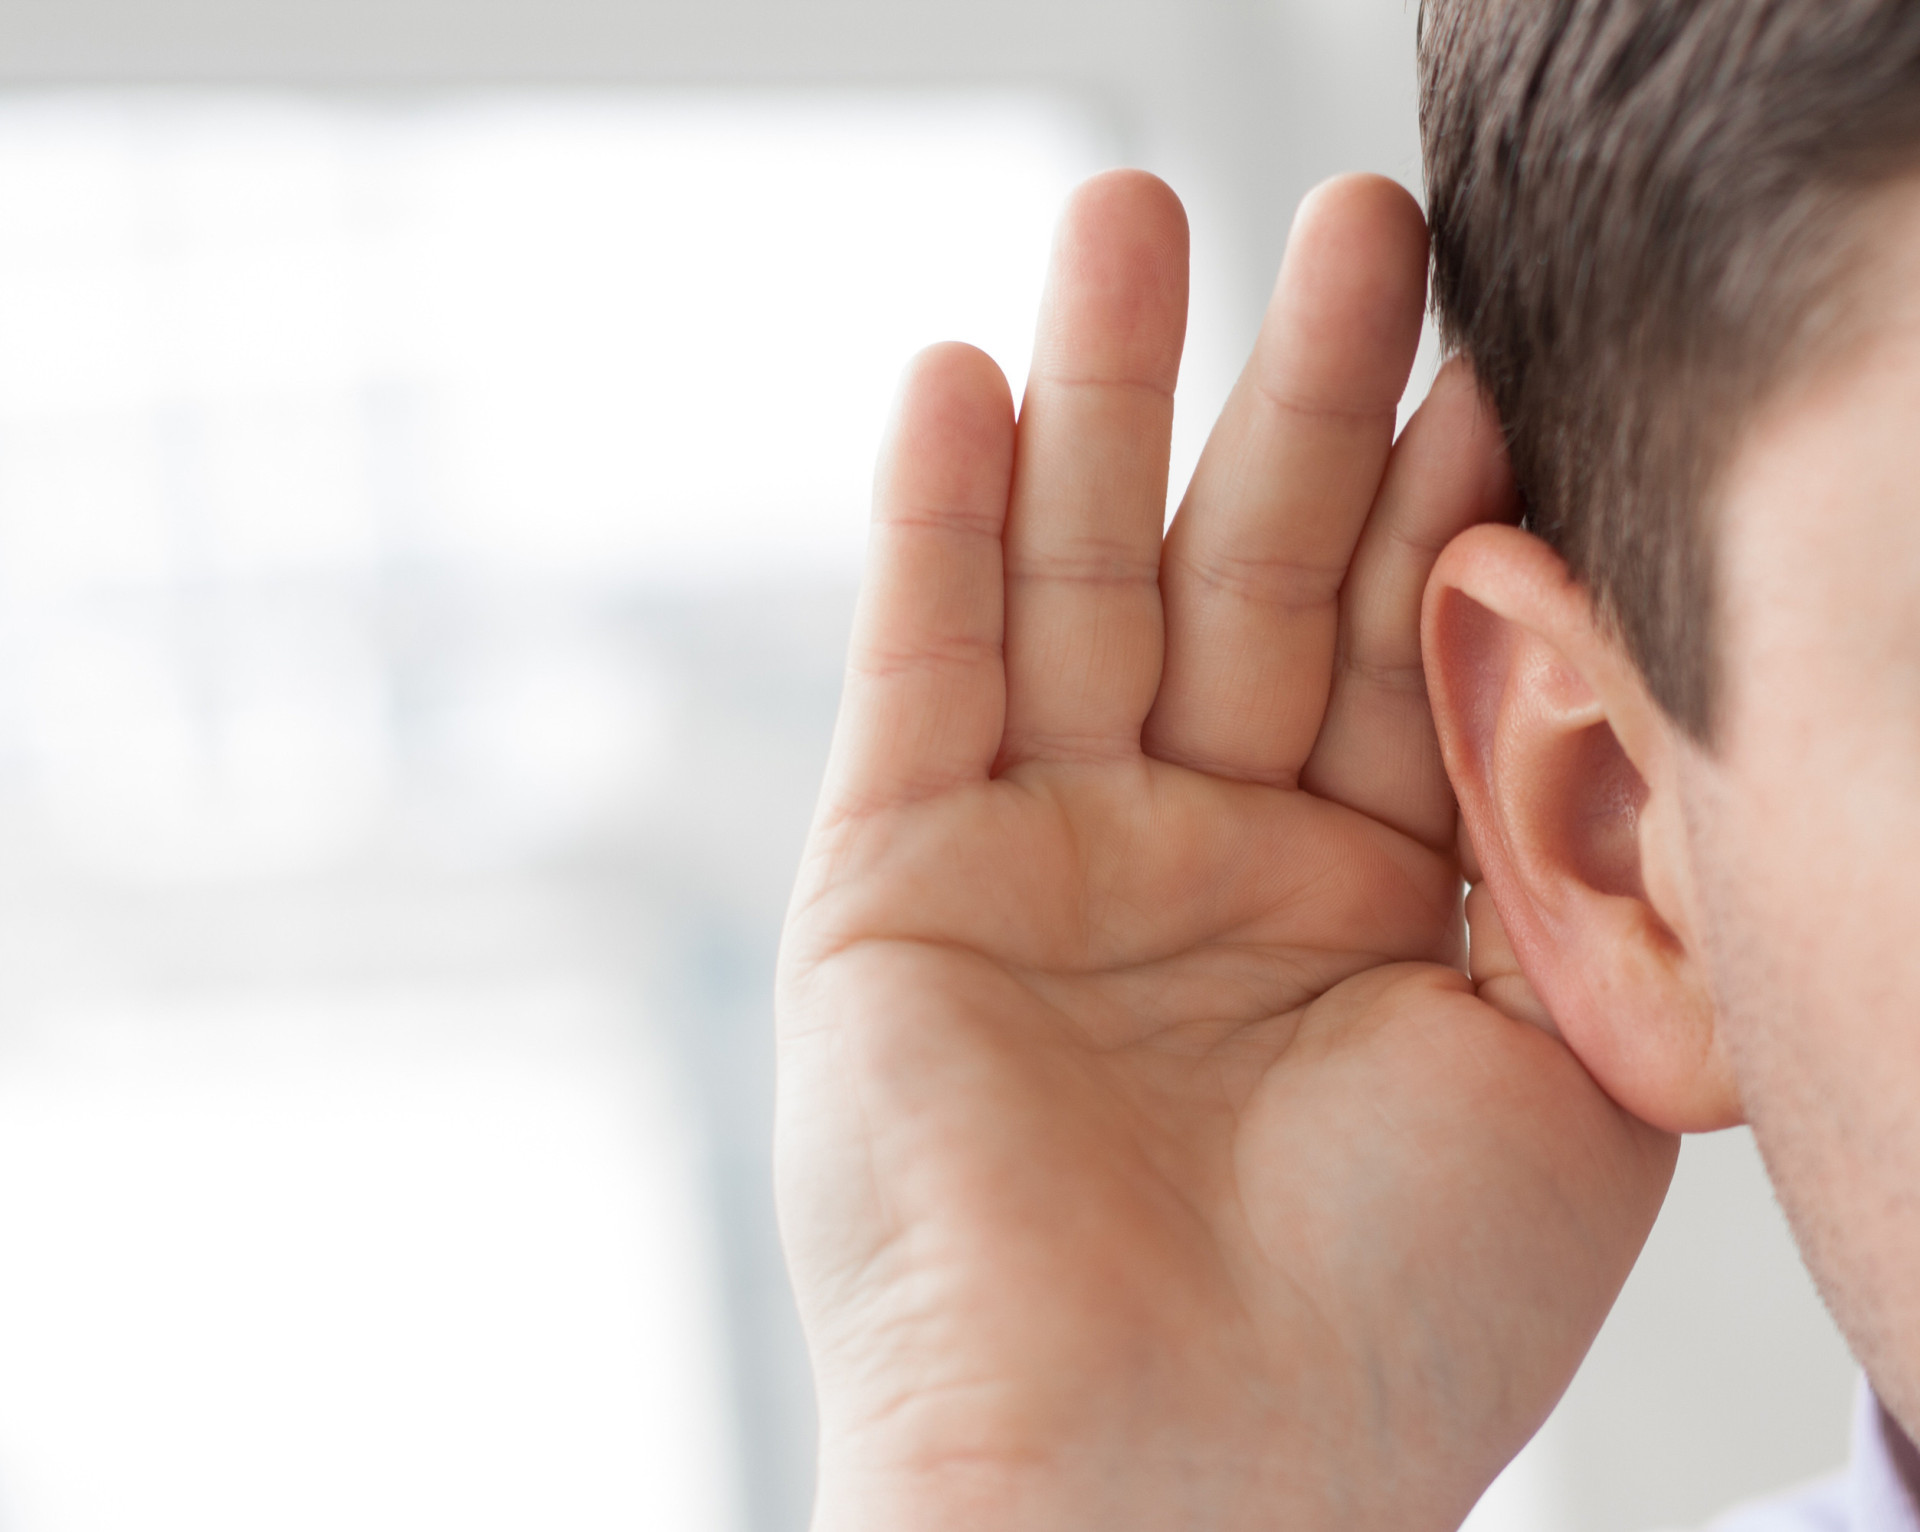 <p><span>Active listening is a very important soft skill, but it can be difficult to train. Proper active listening requires focus, patience, and self-discipline.</span></p><p><a href="https://www.msn.com/en-us/community/channel/vid-7xx8mnucu55yw63we9va2gwr7uihbxwc68fxqp25x6tg4ftibpra?cvid=94631541bc0f4f89bfd59158d696ad7e">Follow us and access great exclusive content every day</a></p>